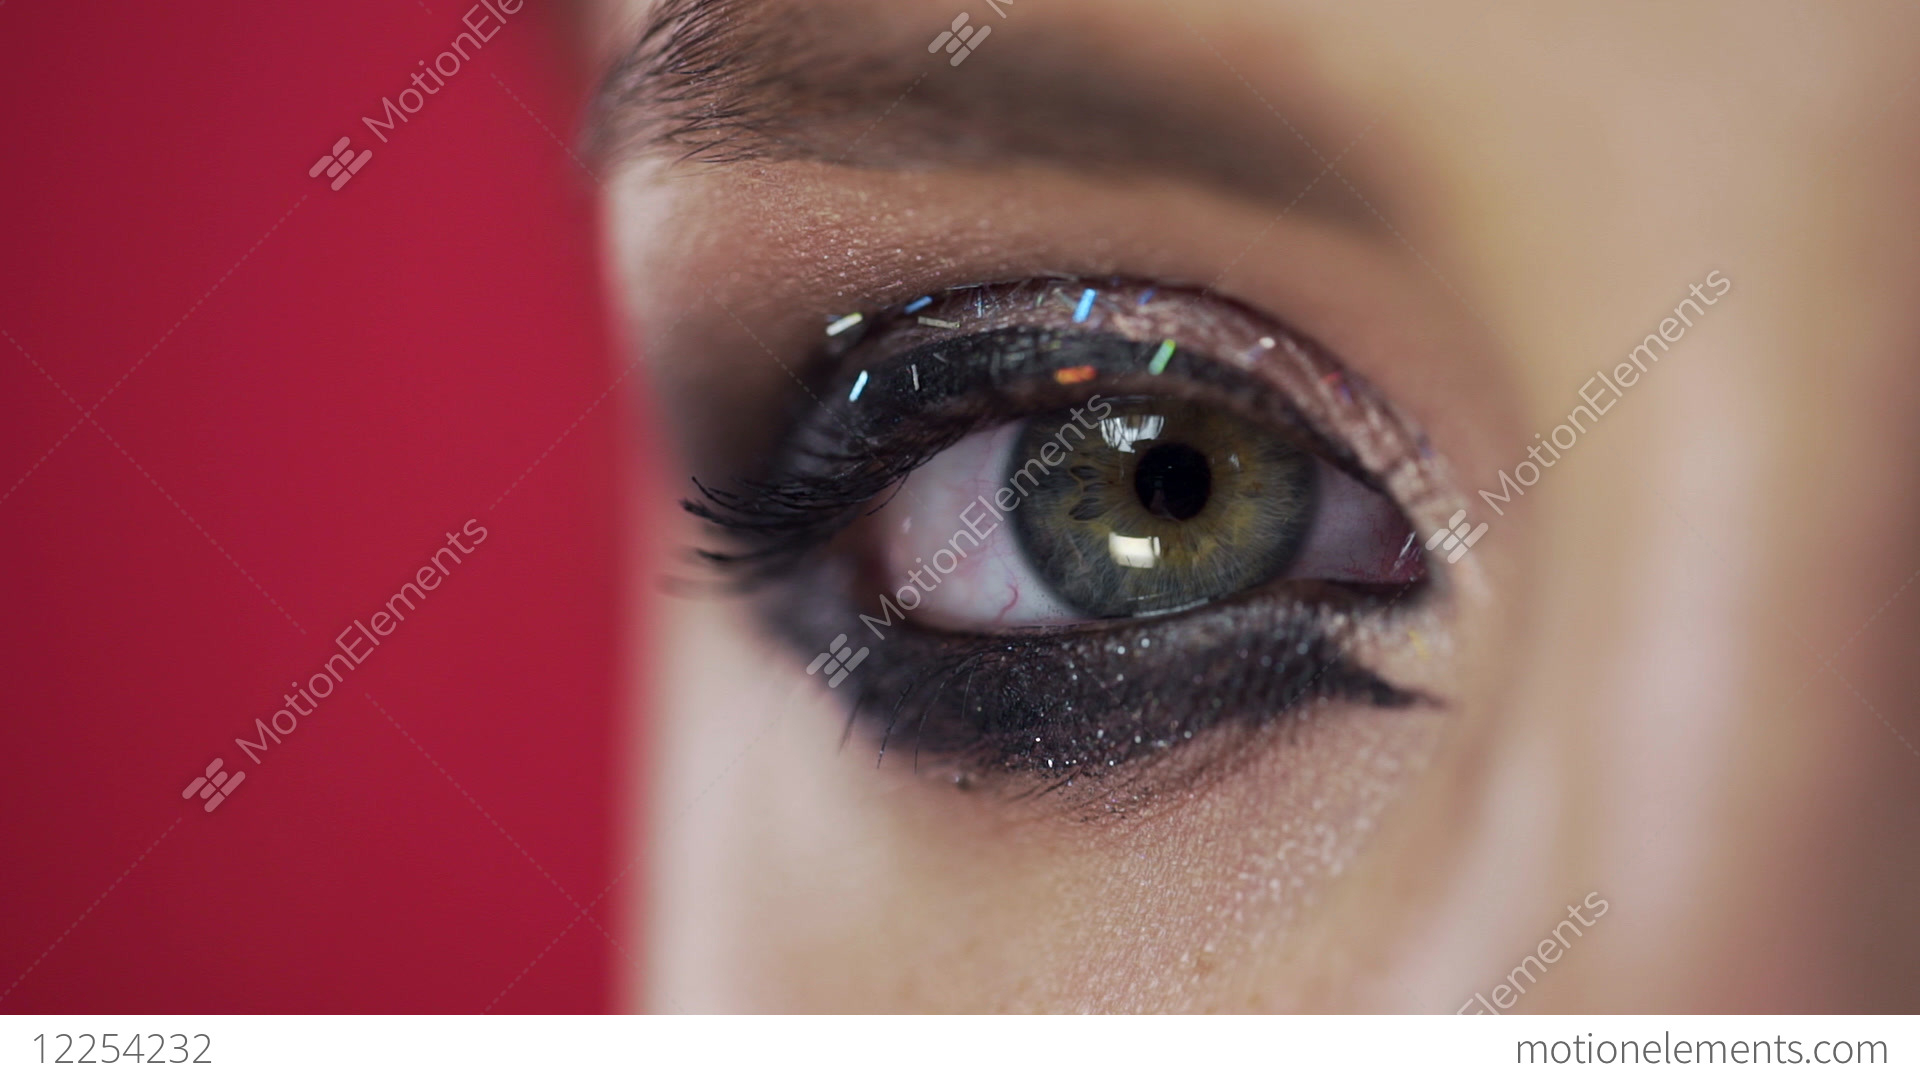 Evening Eye Makeup Macro Shot Of The Womans Blinking Eye With Evening Makeup And